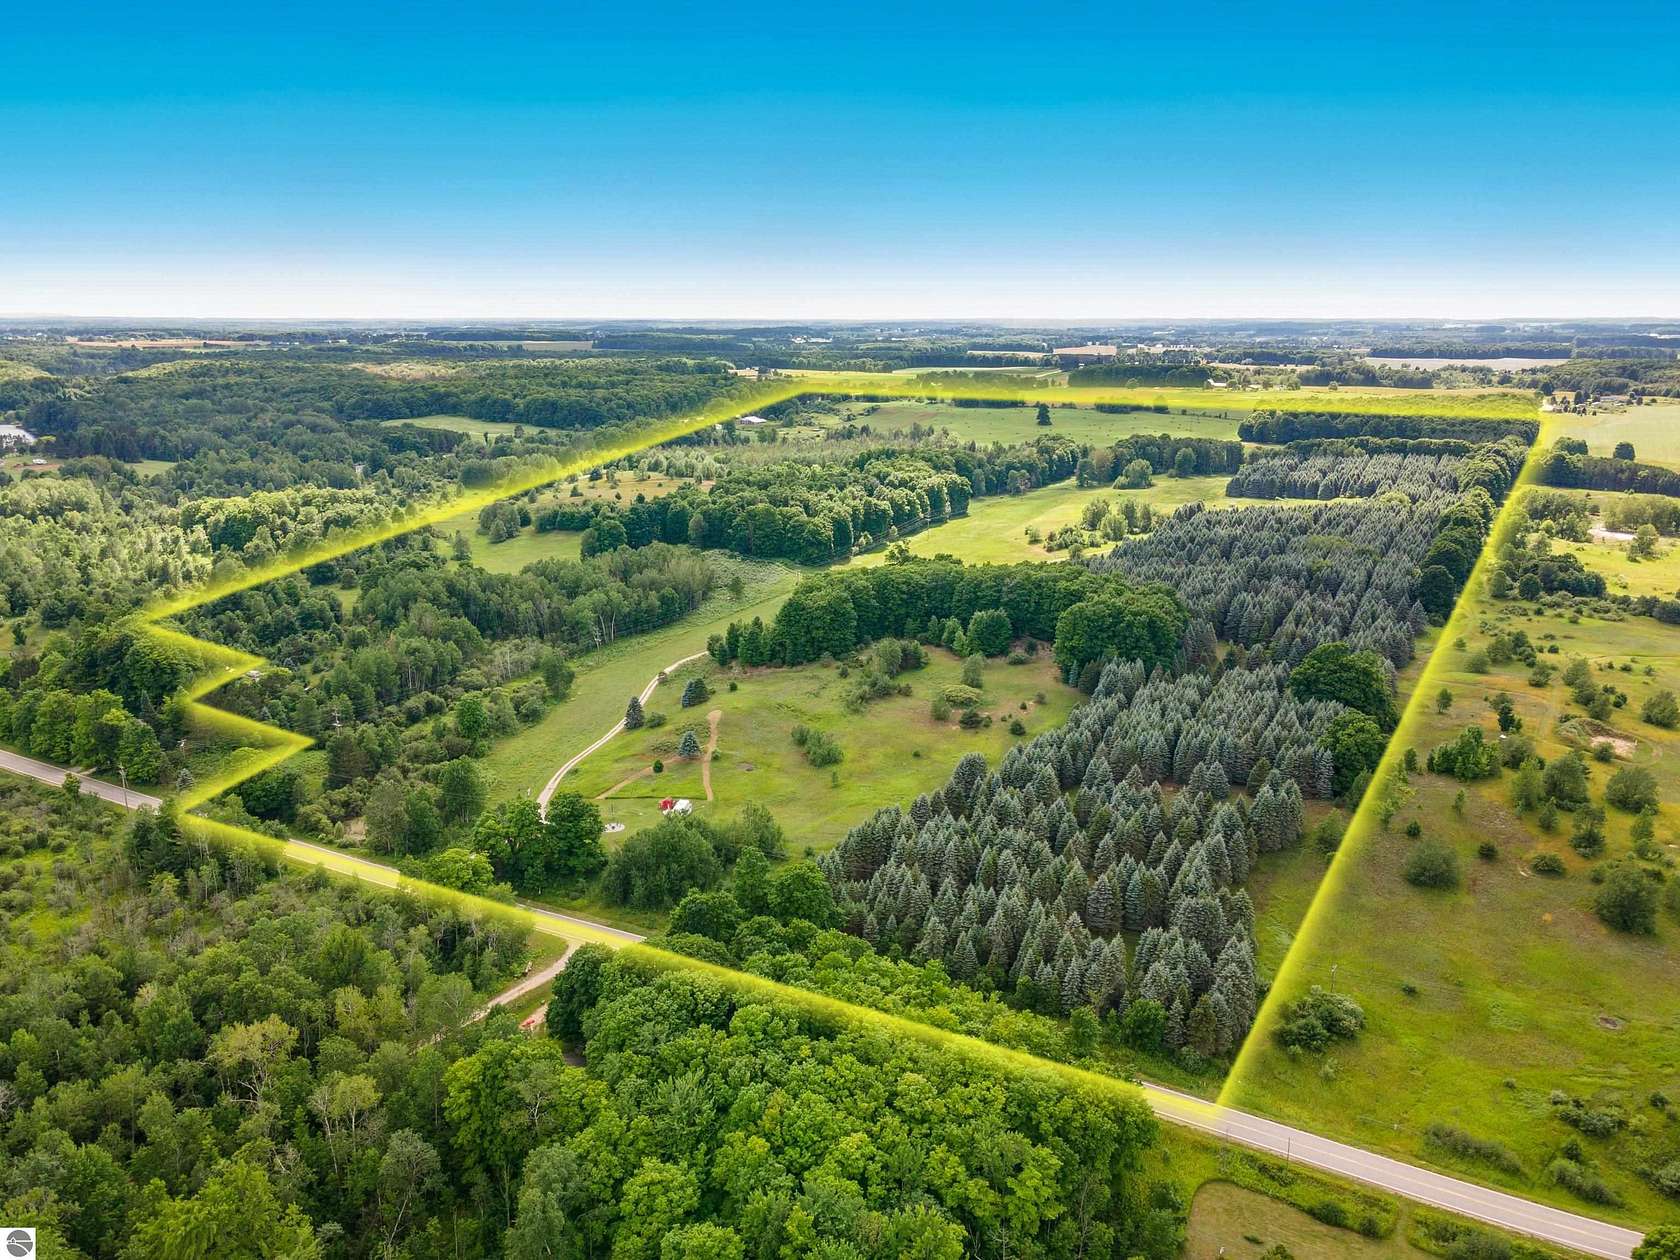 77 Acres of Land for Sale in Kingsley, Michigan